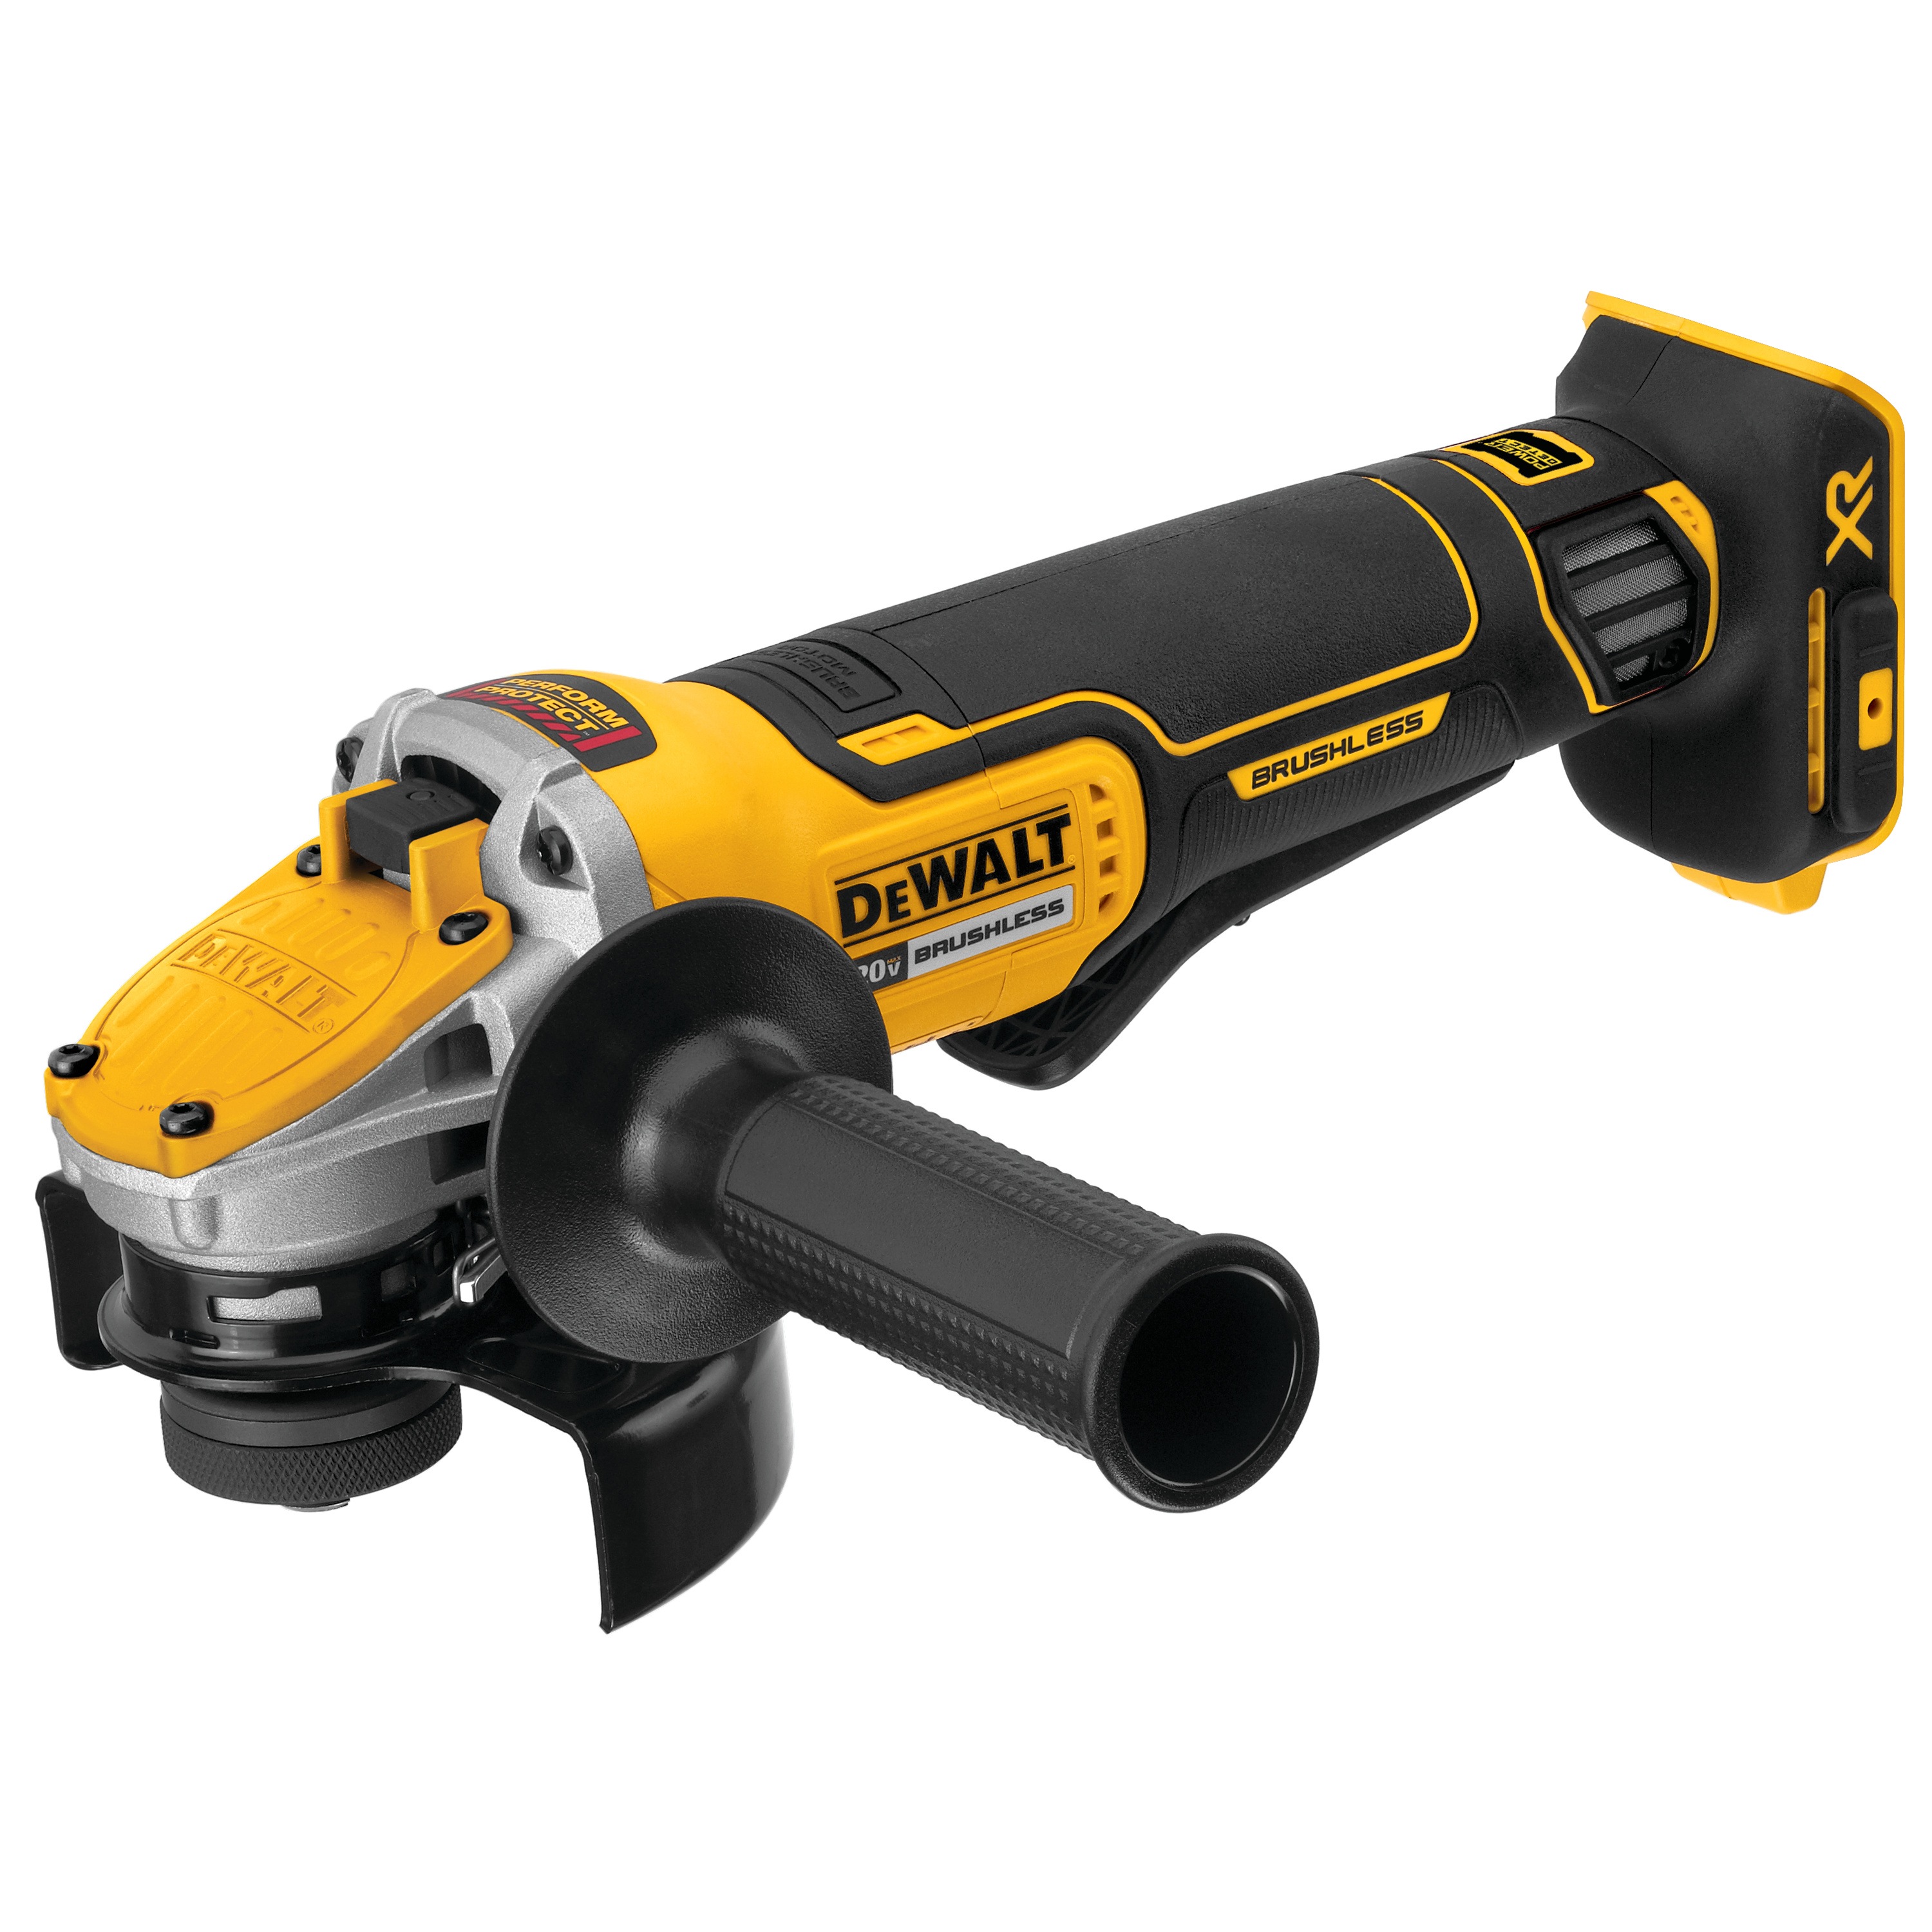 DEWALT - 20V MAX XR 412  5 in Brushless Cordless Small Angle Grinder with Power Detect Tool Technology Tool Only - DCG415B